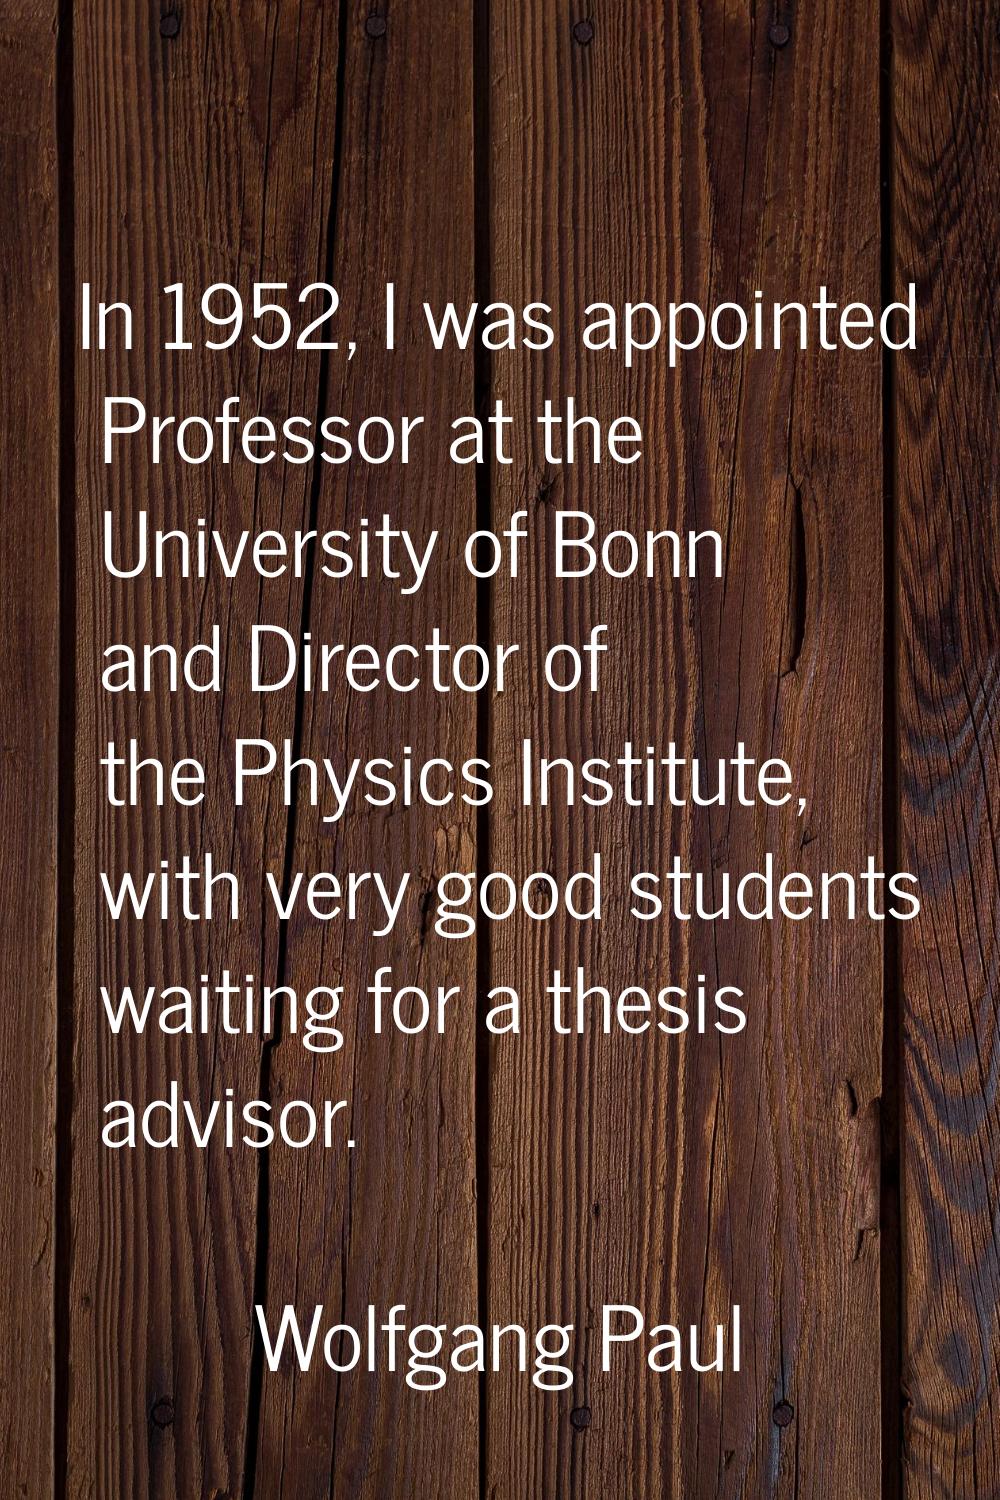 In 1952, I was appointed Professor at the University of Bonn and Director of the Physics Institute,